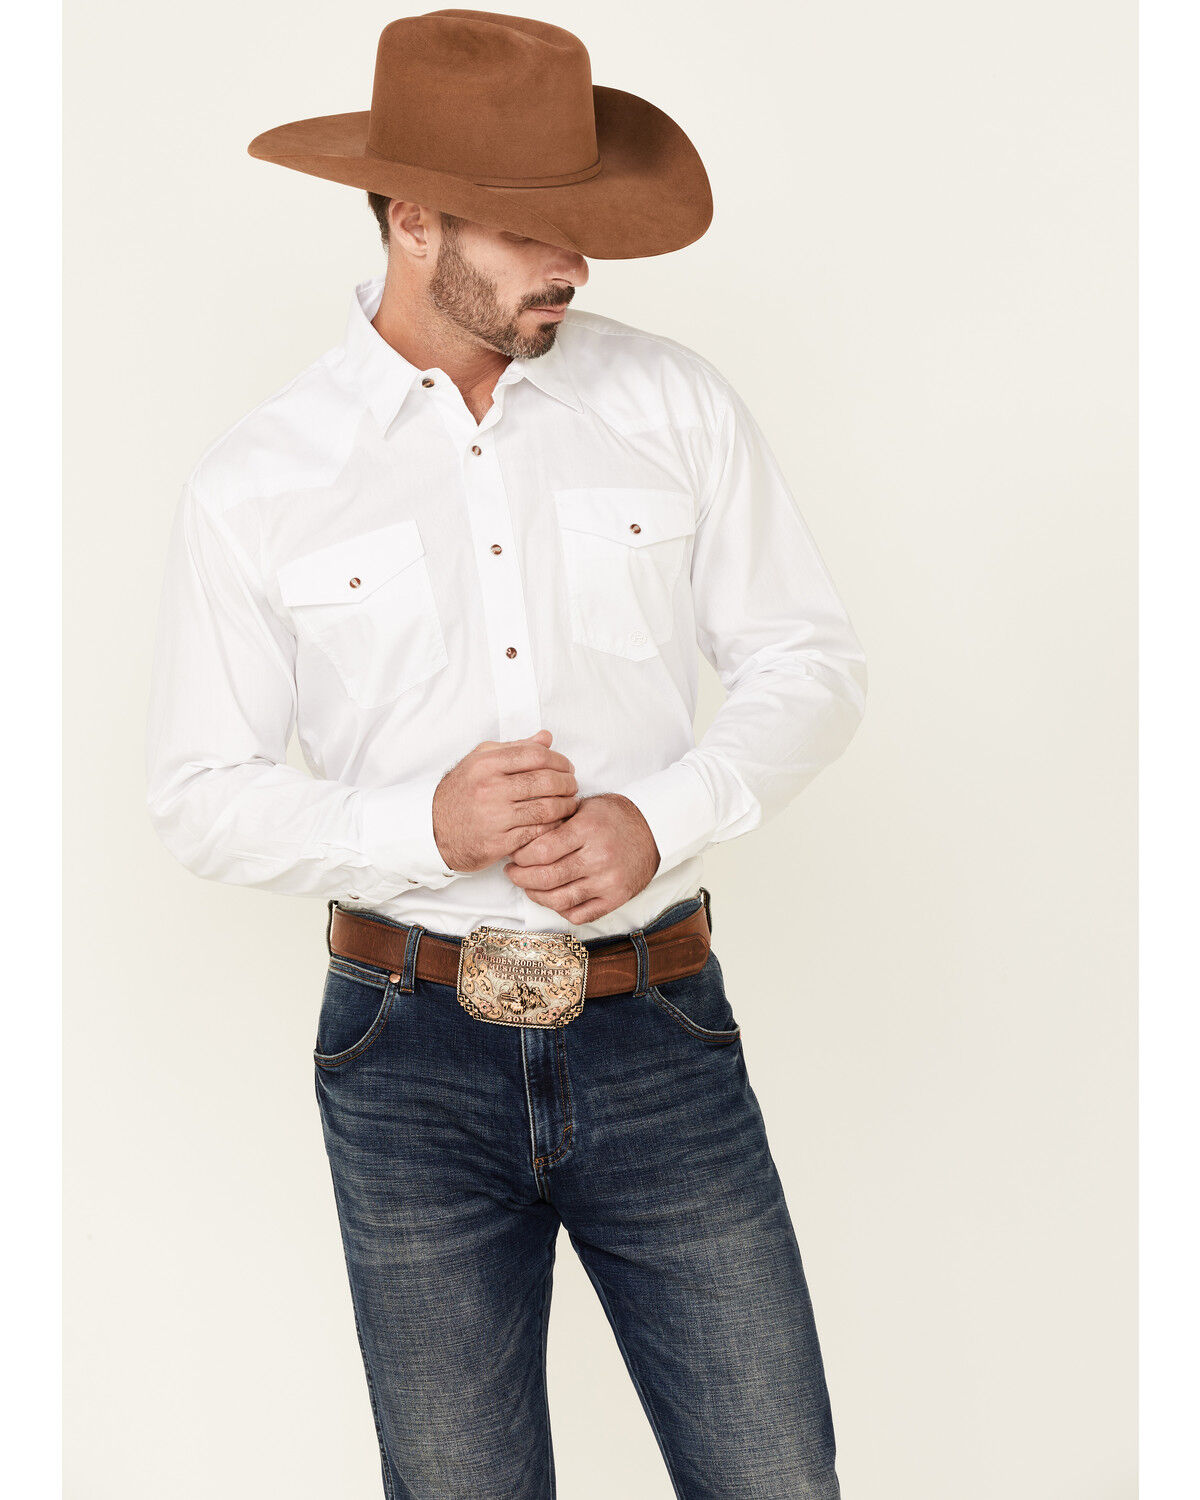 Men's Shirts - Country Outfitter